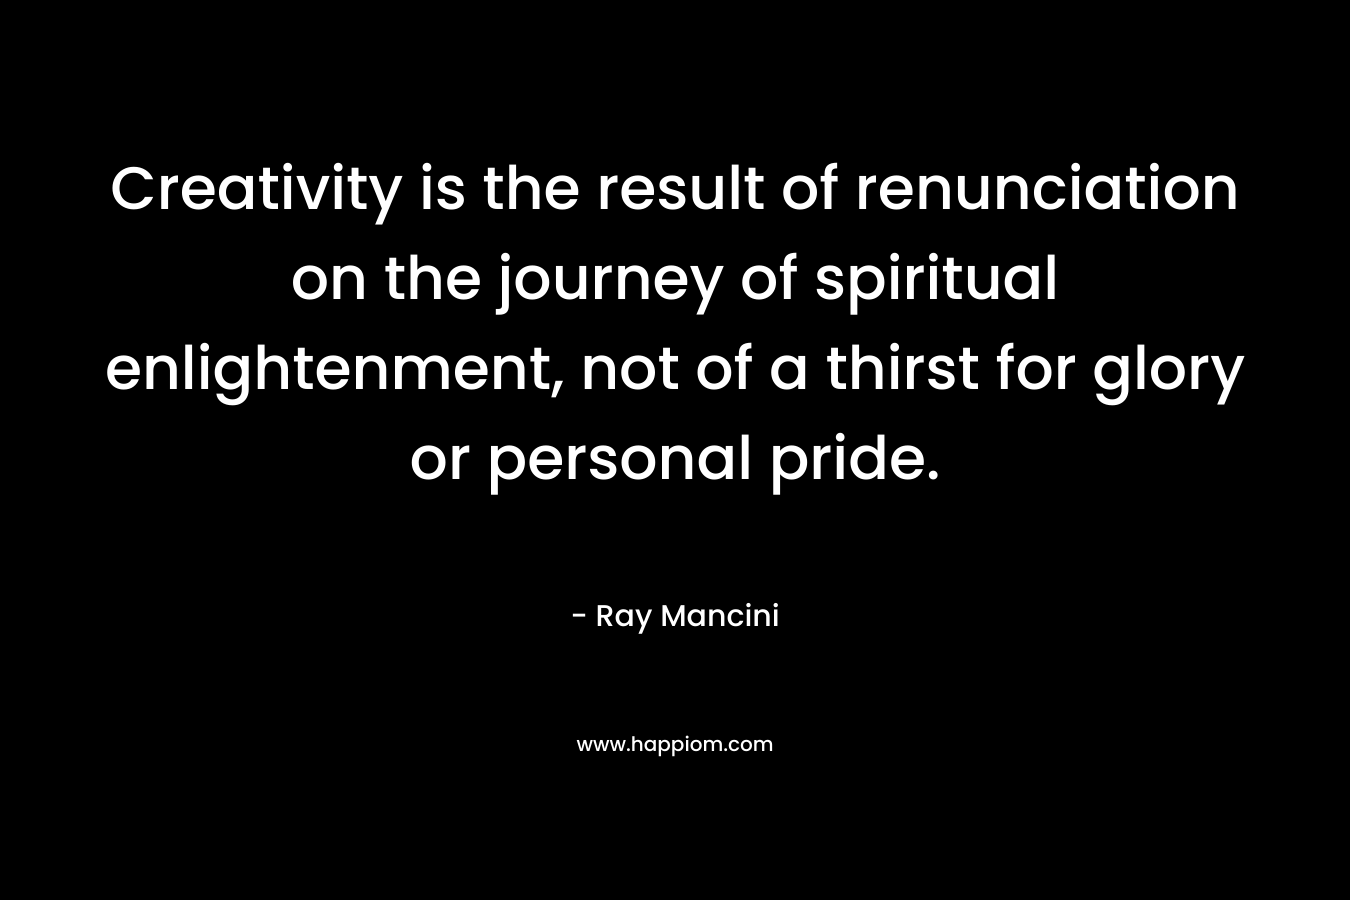 Creativity is the result of renunciation on the journey of spiritual enlightenment, not of a thirst for glory or personal pride. – Ray Mancini